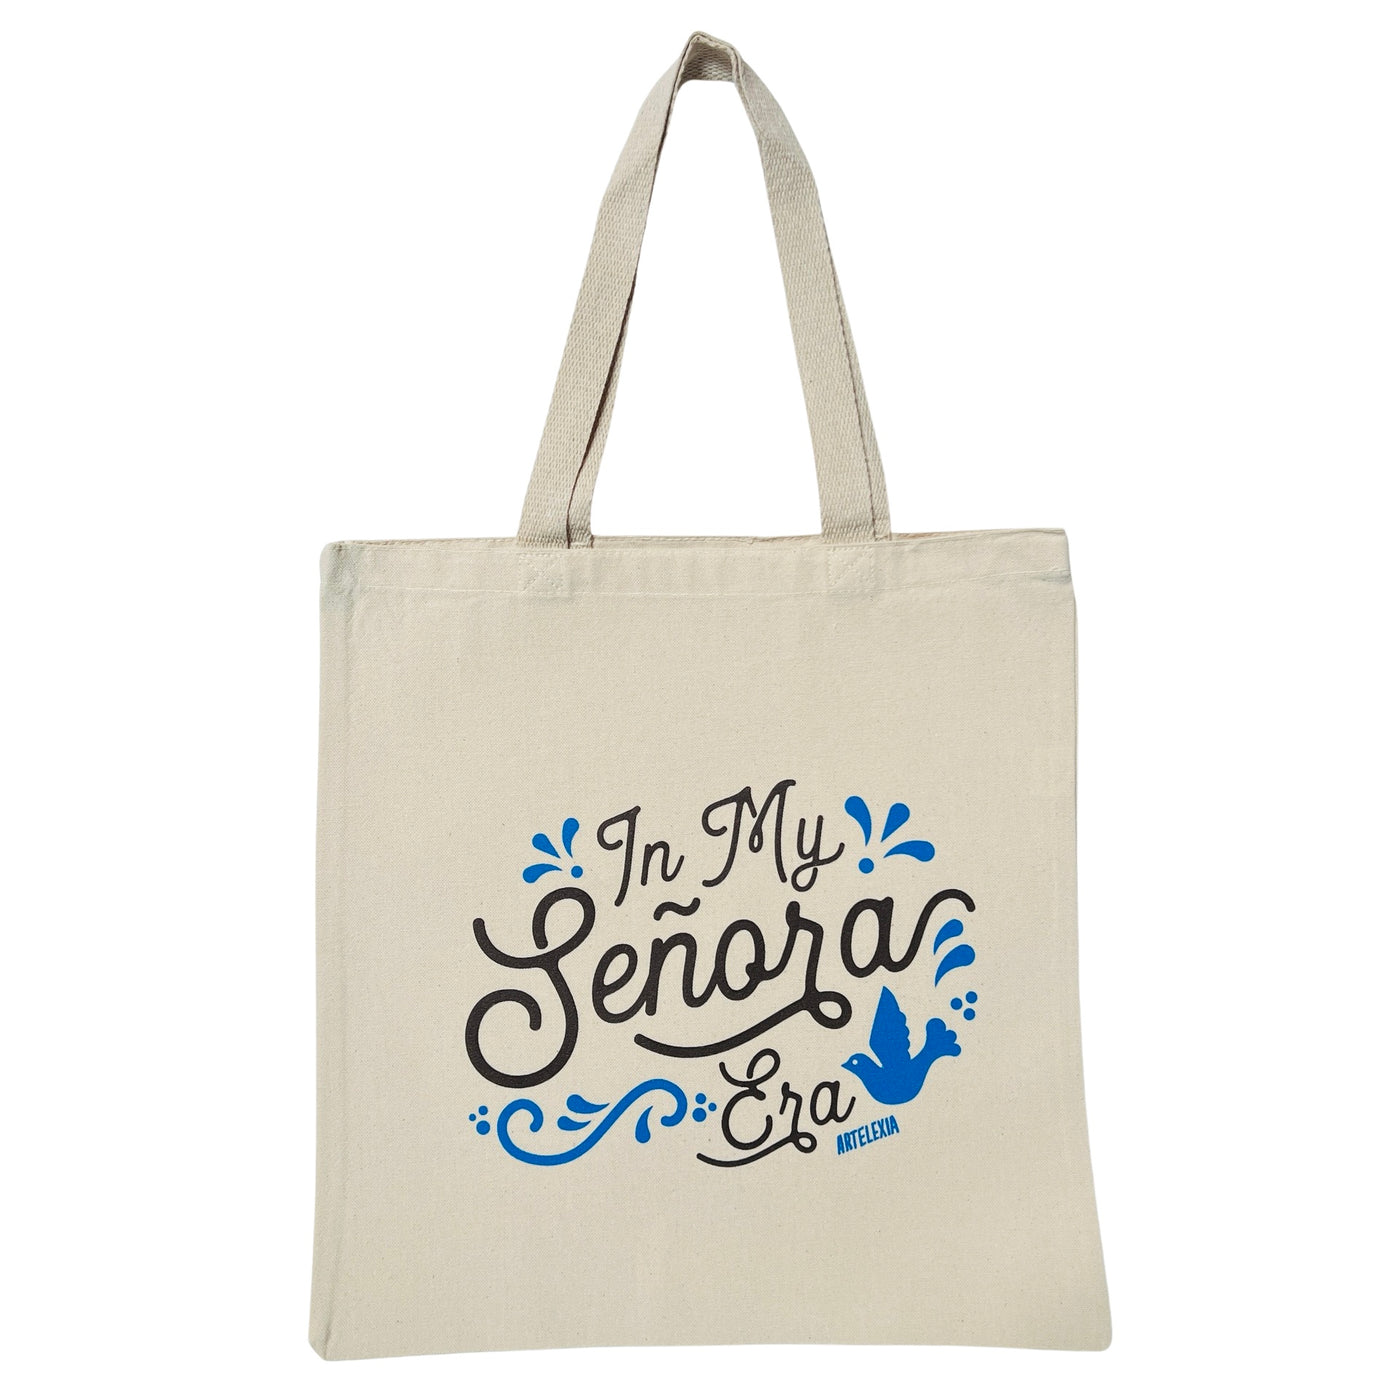 Natural tote bag with the phrase In My Señora Era in brown lettering featuring a blue bird and filagree design.